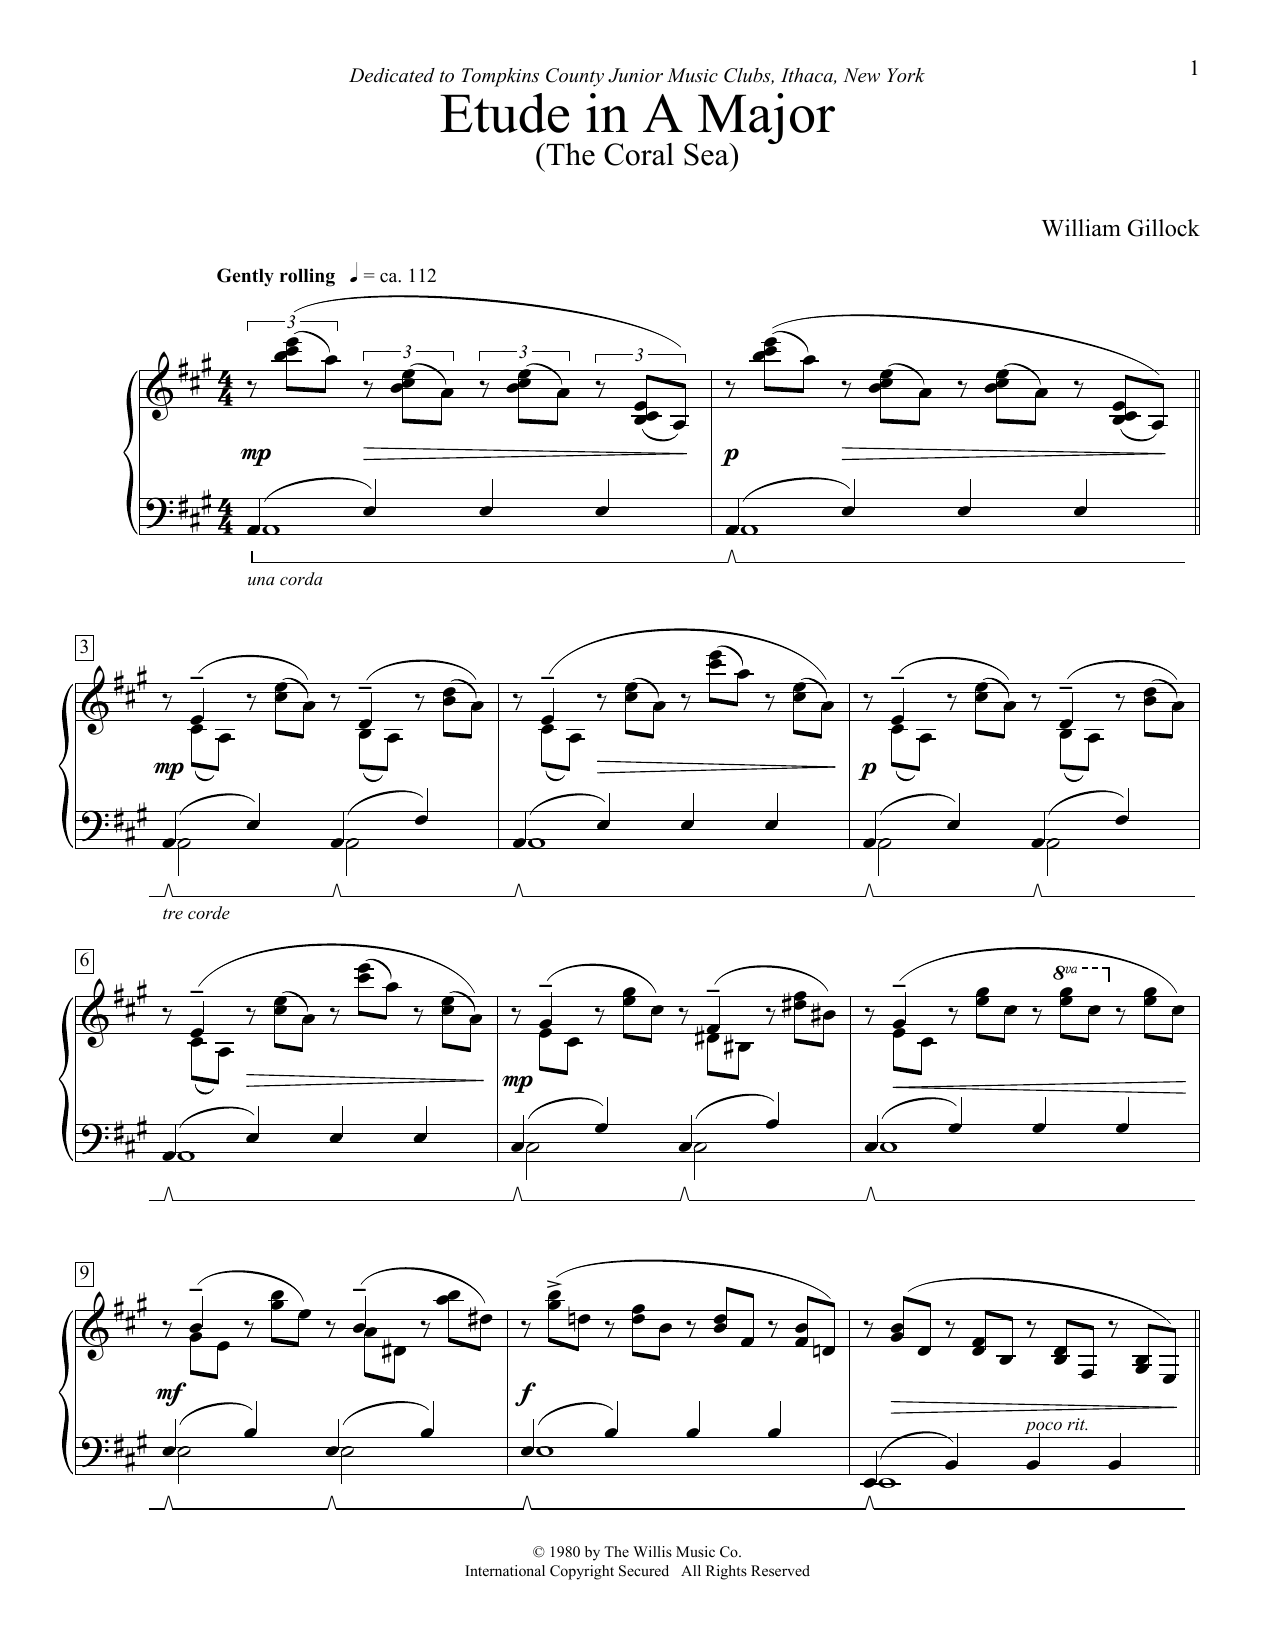 Download William Gillock Etude In A Major (The Coral Sea) Sheet Music